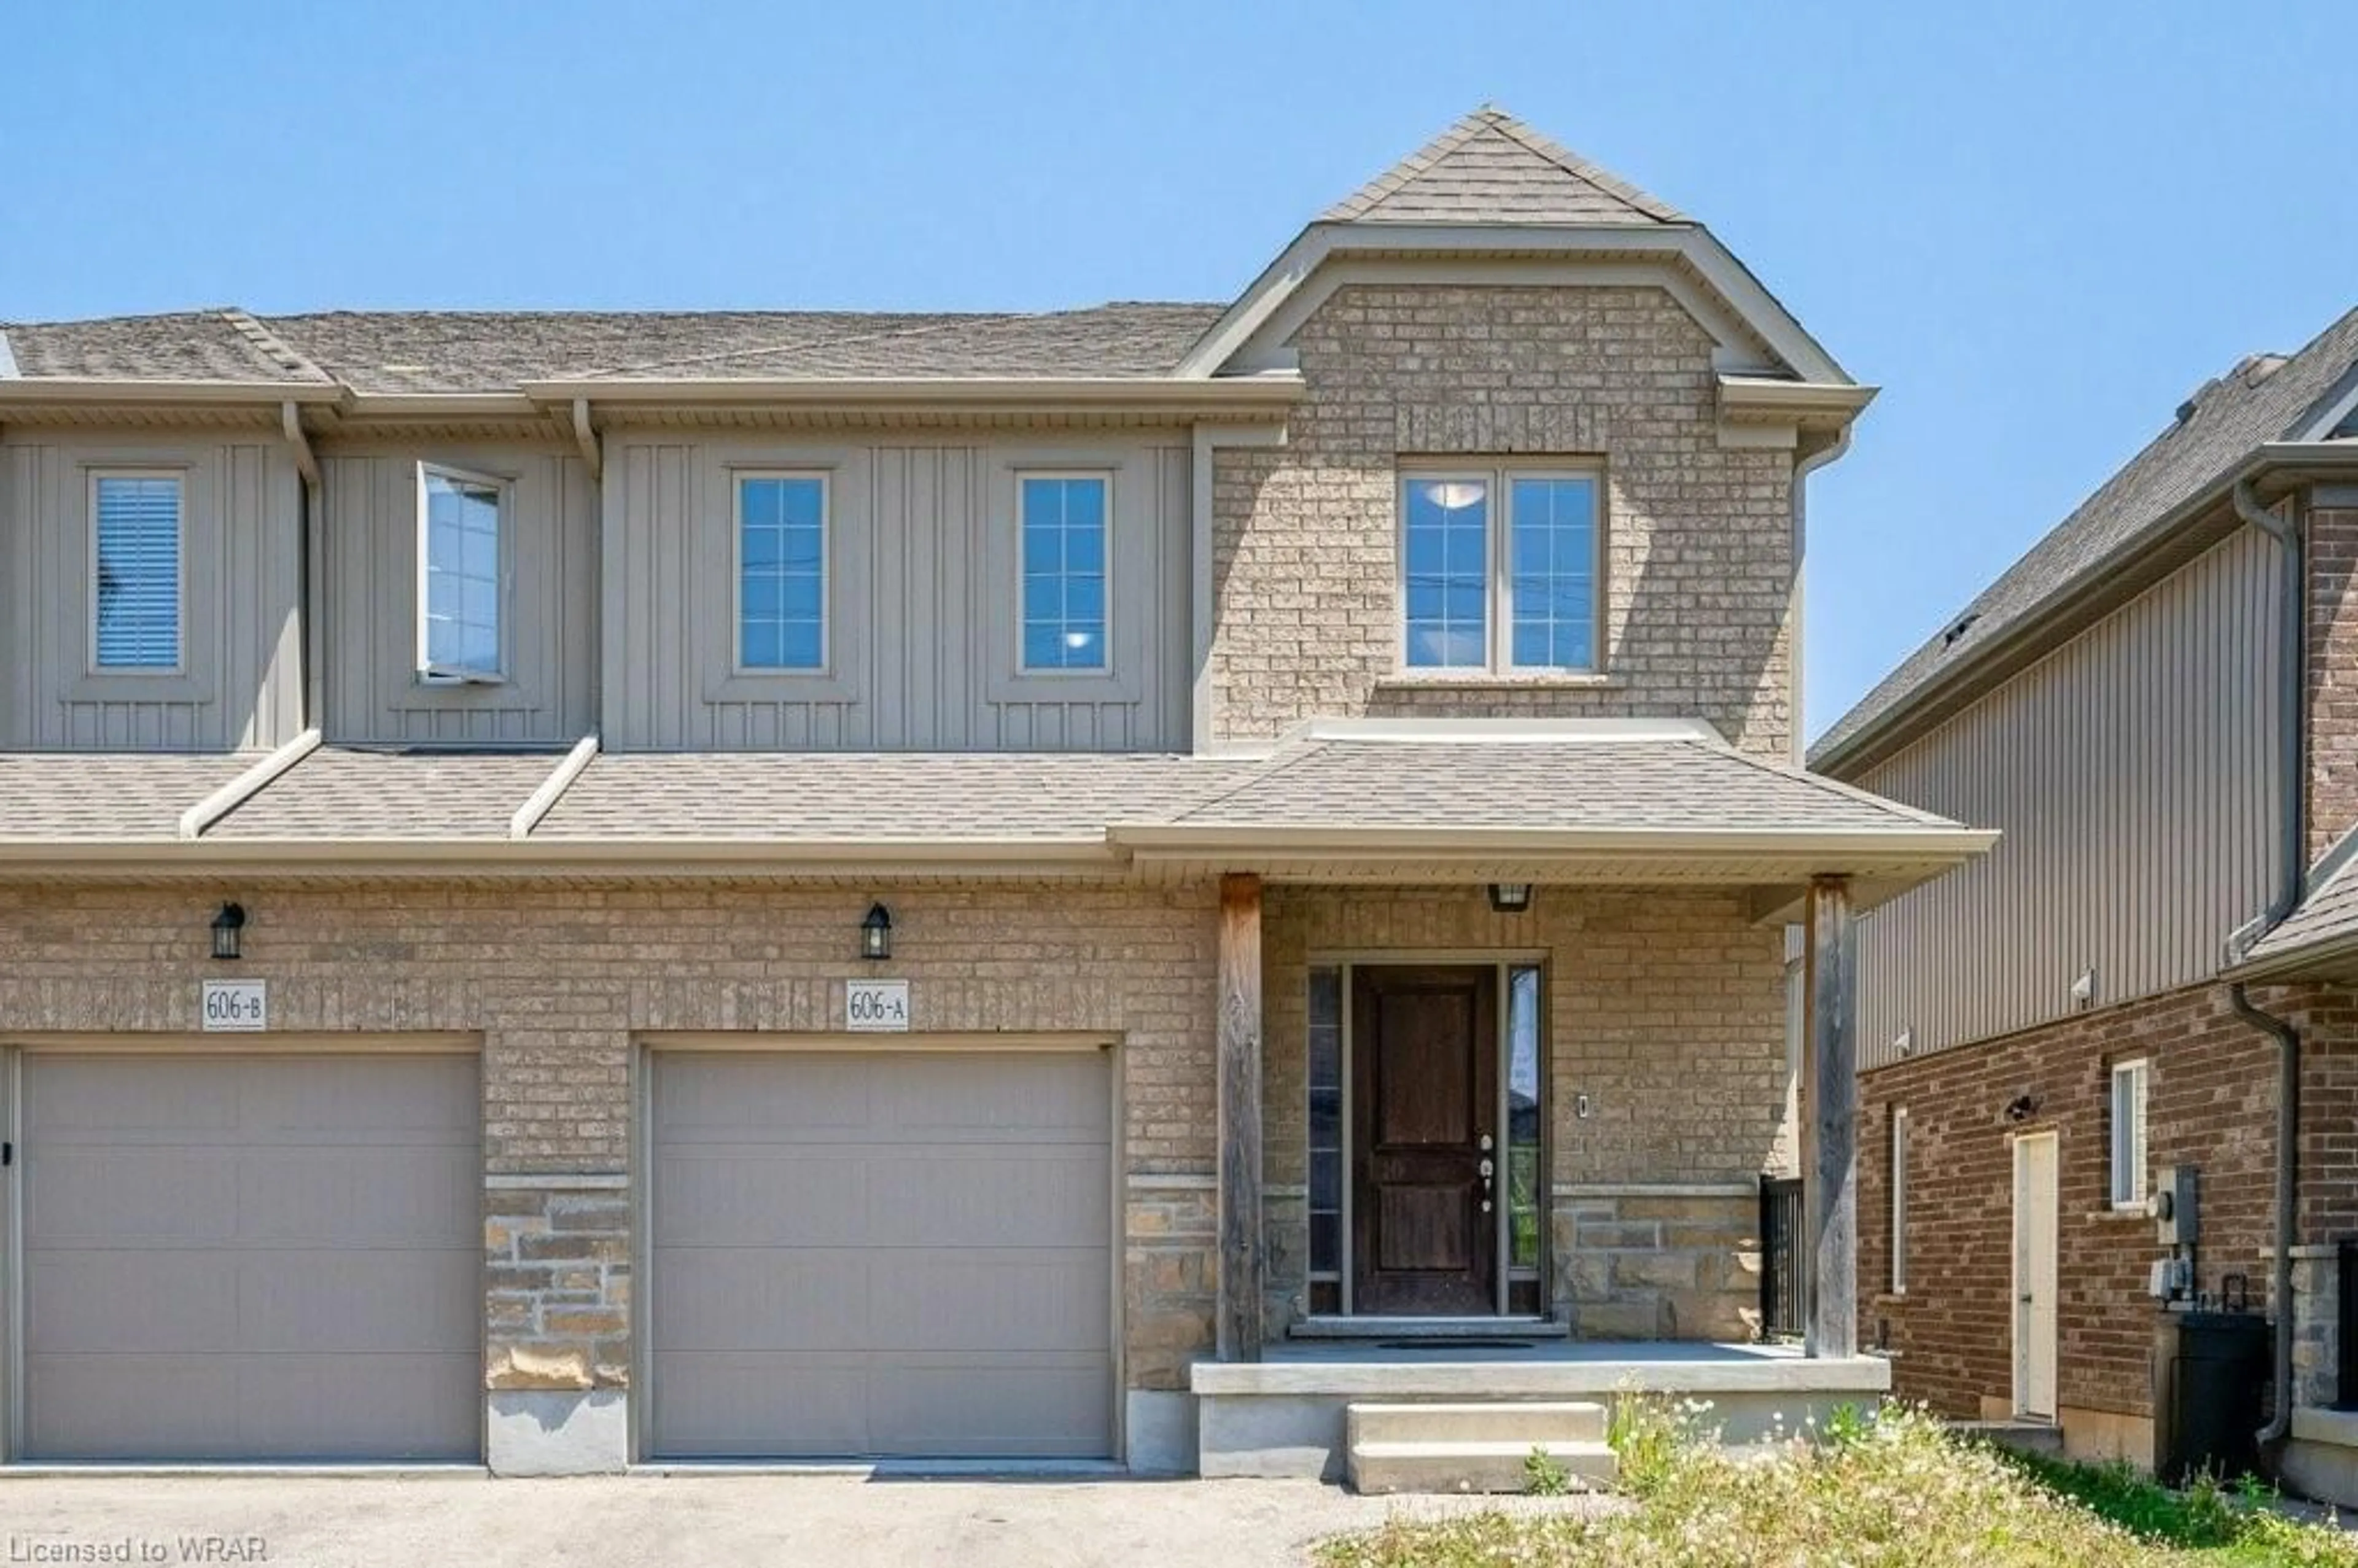 Home with brick exterior material for 606 Montpellier Dr #A, Waterloo Ontario N2T 0B2